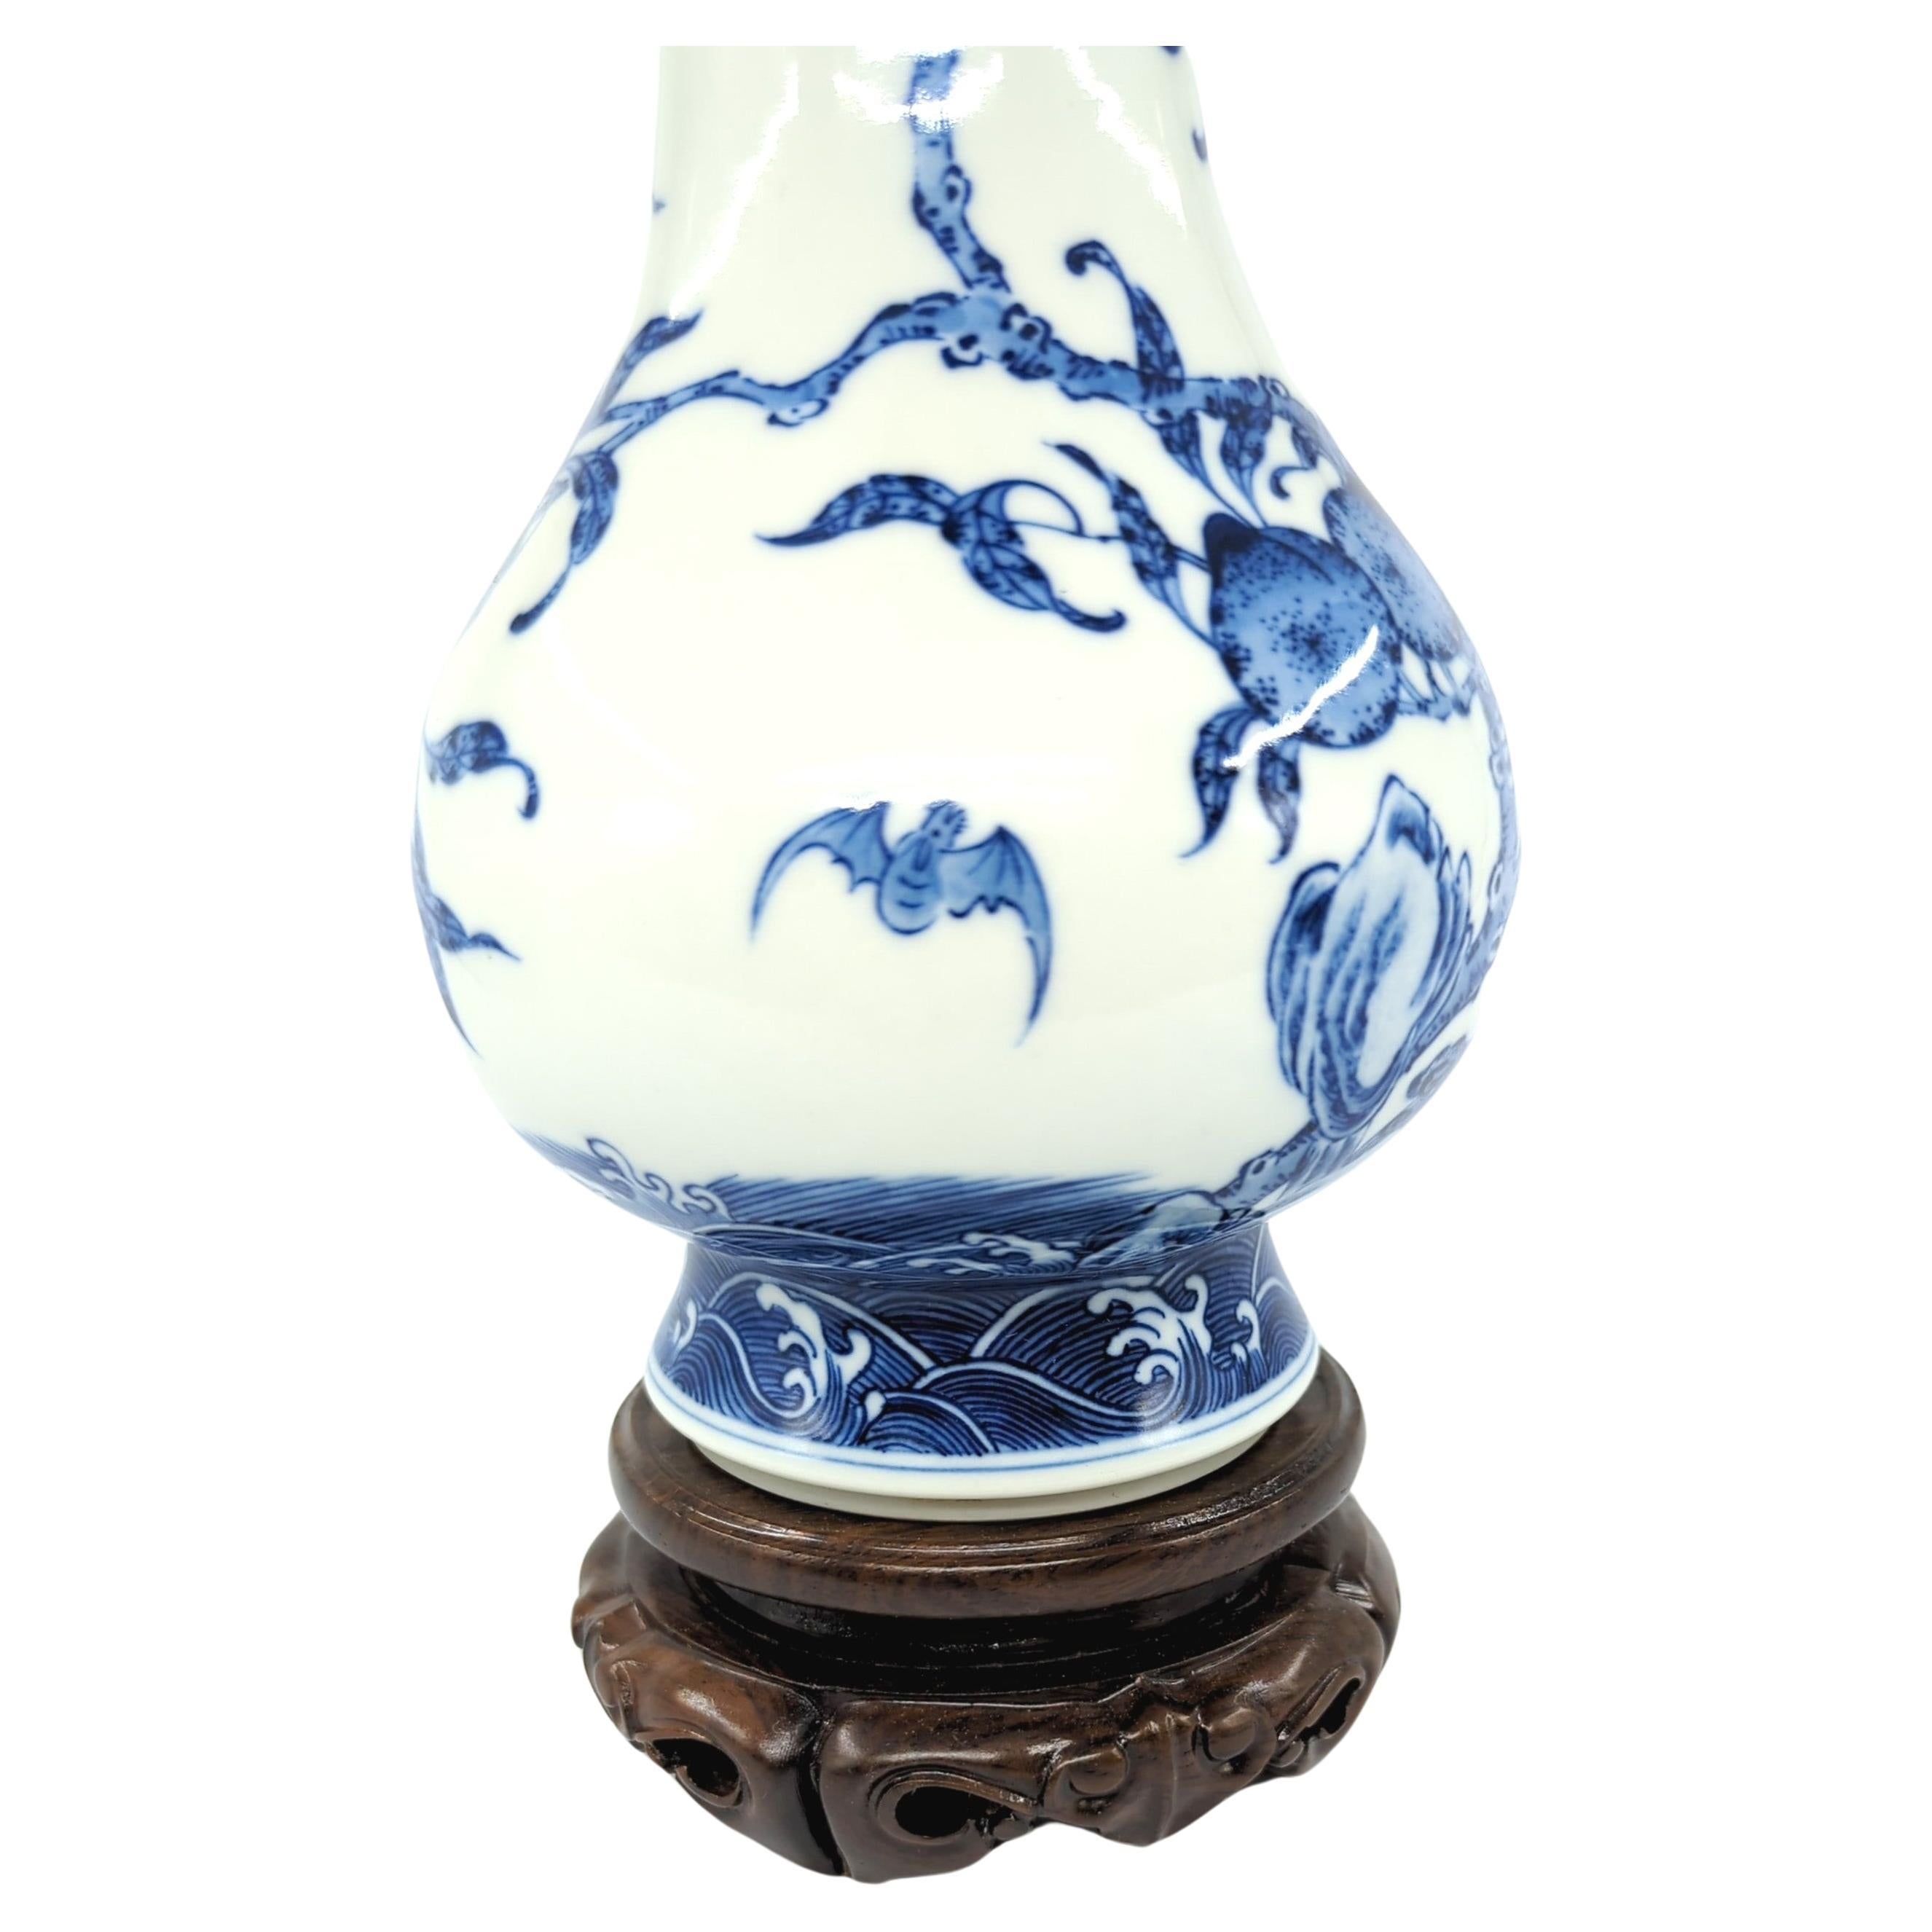 Fine Chinese Porcelain Underglaze Blue White Bats Peaches Bottle Vase Stand 20c In Excellent Condition For Sale In Richmond, CA